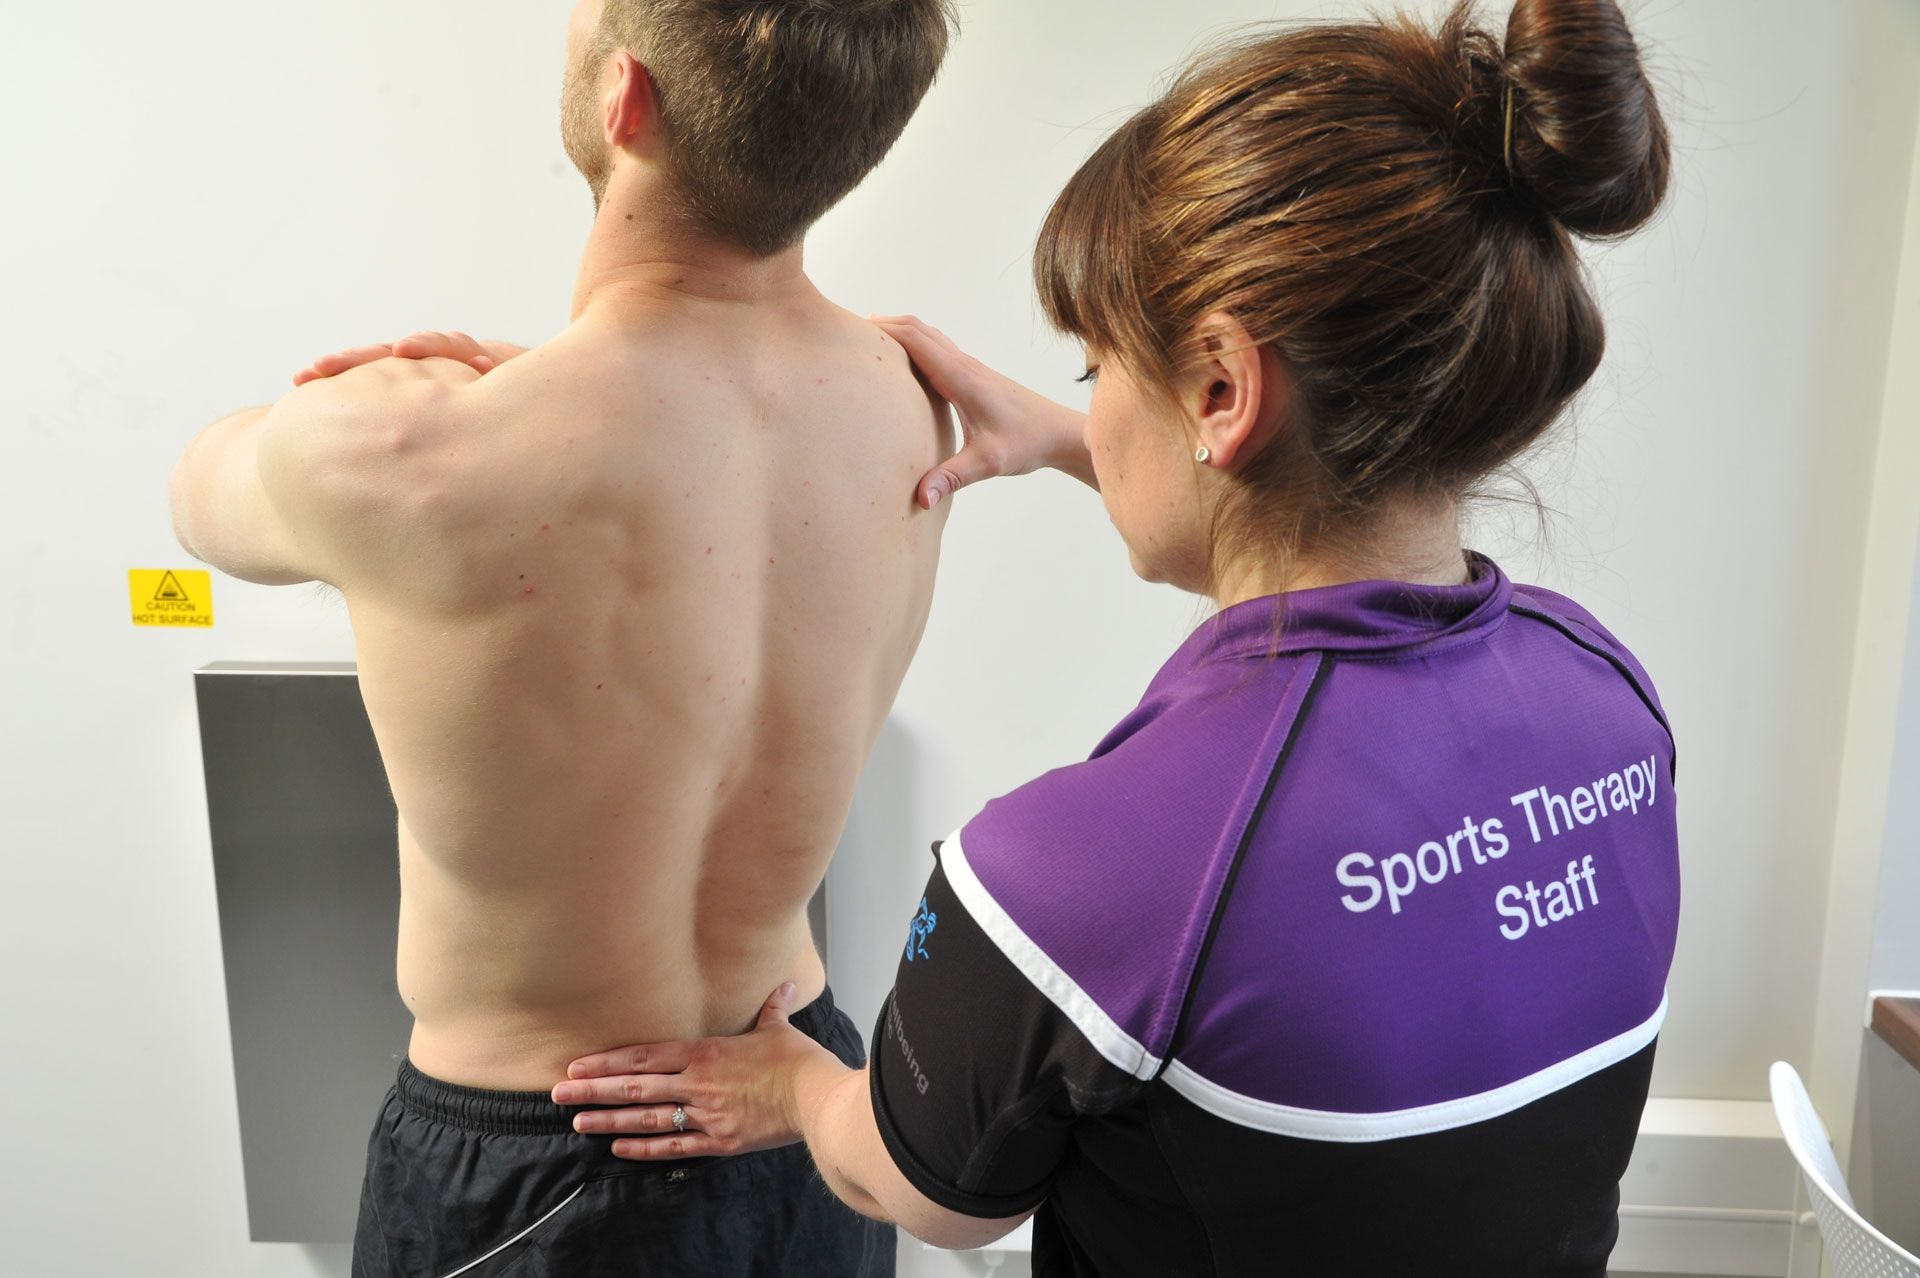 A sports therapy student attends to a male in the wellbeing clinic